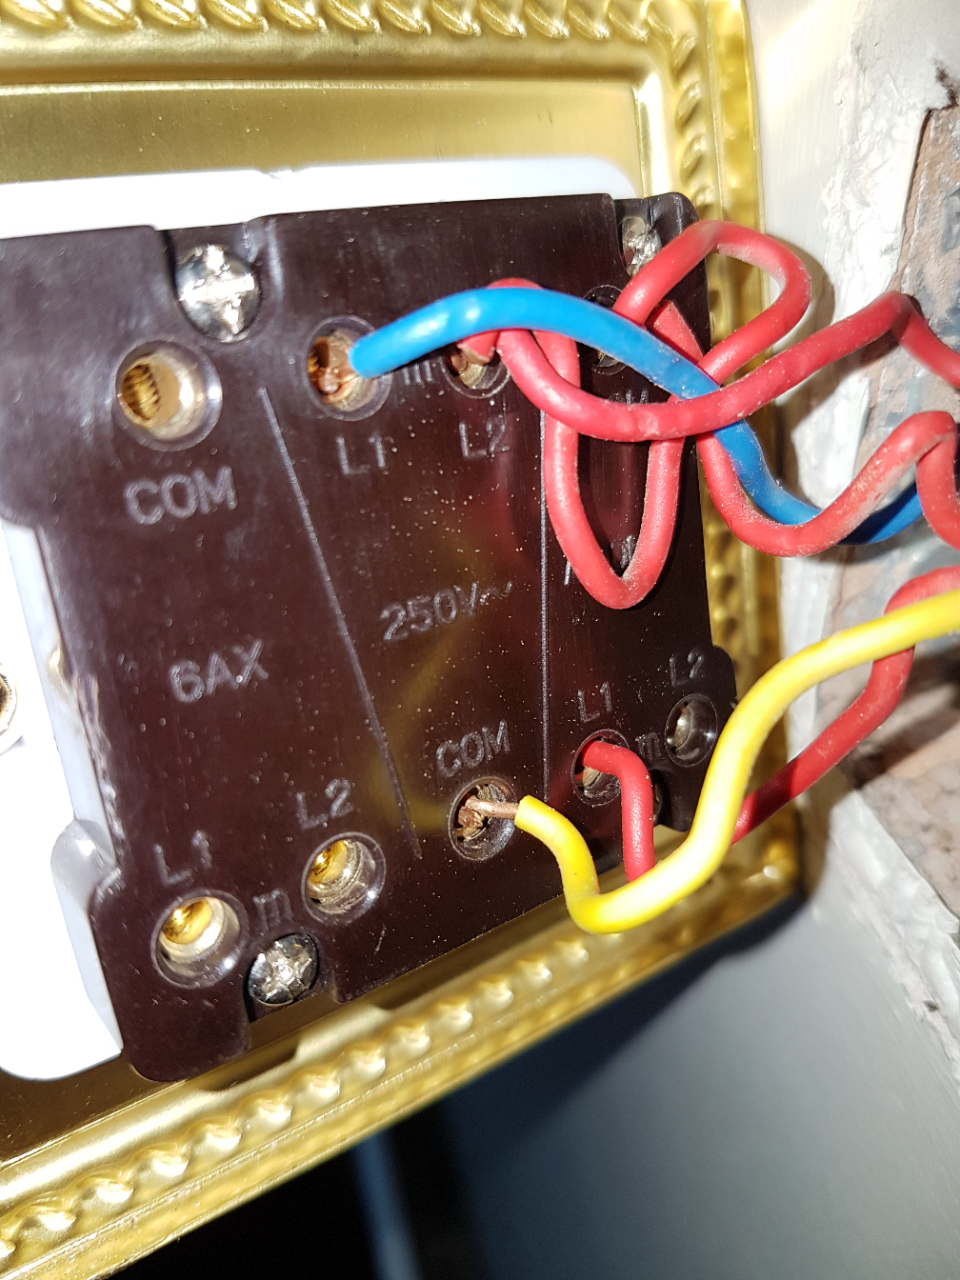 Converting one to two gang, two way light switch | DIYnot Forums